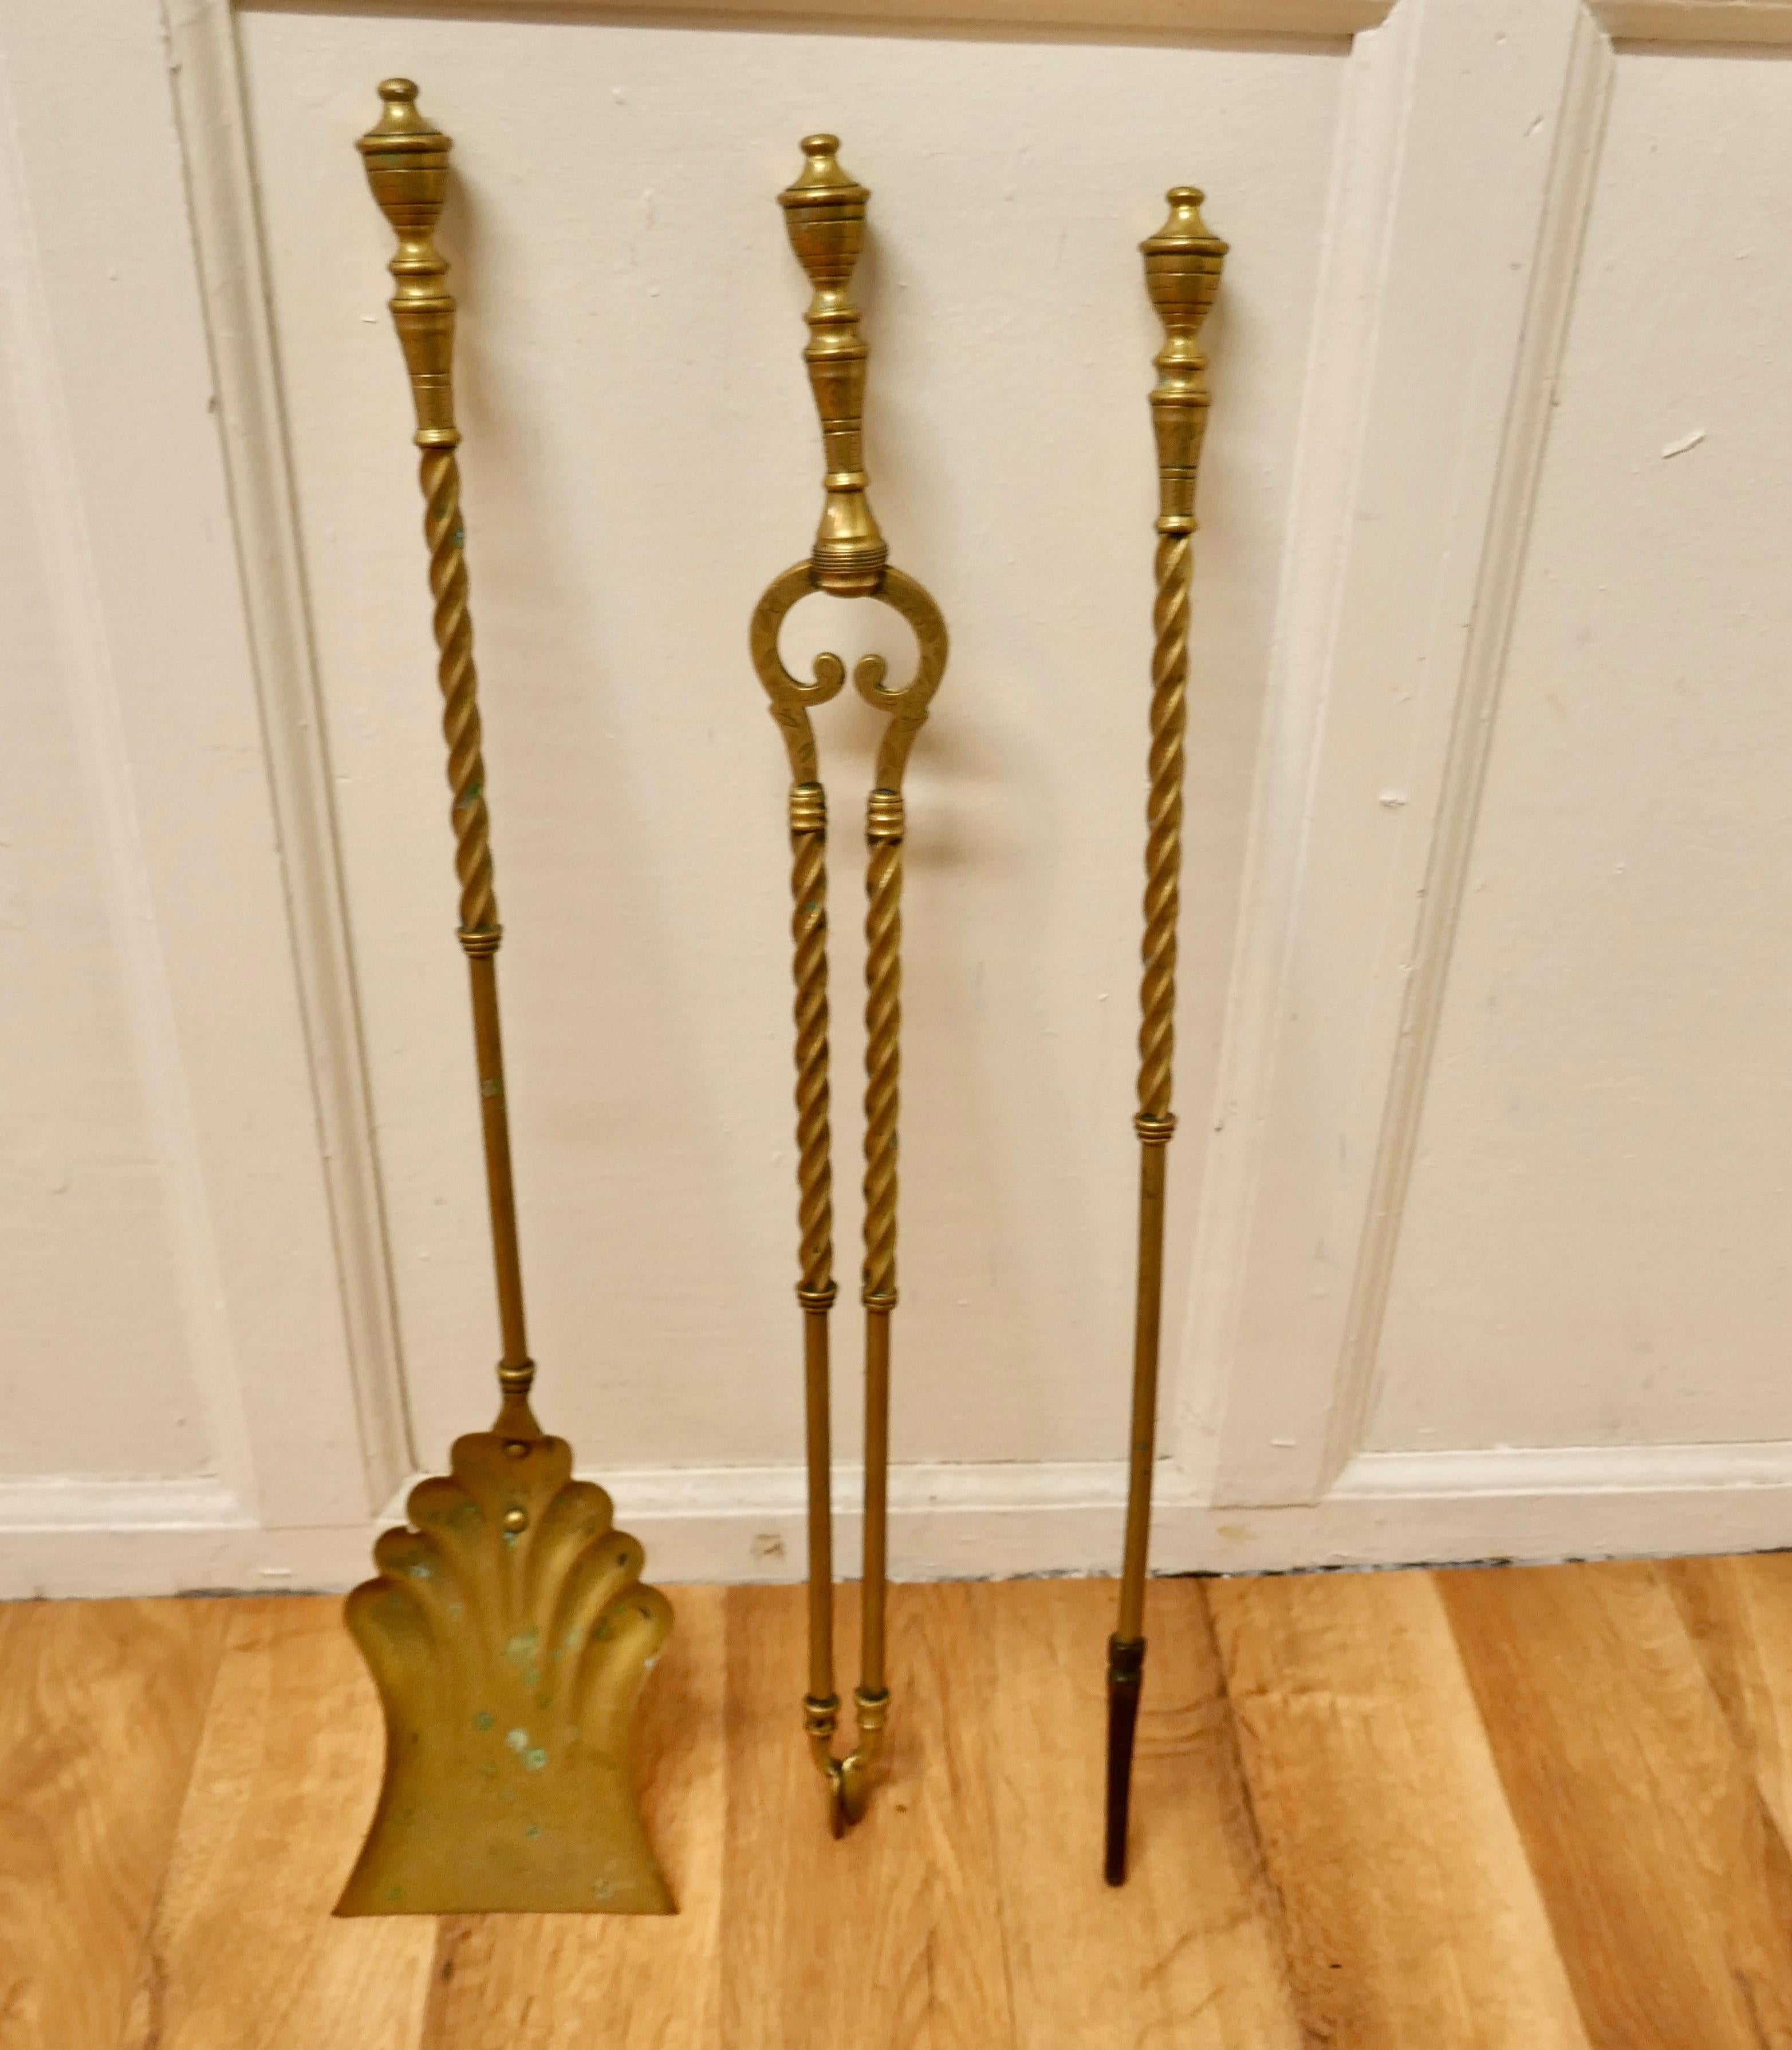 19th century set of long barley twist fireside tools

A great trio, tongs, shovel and poker
Made in Brass and in good used condition
The tools are 27” long
AC195.